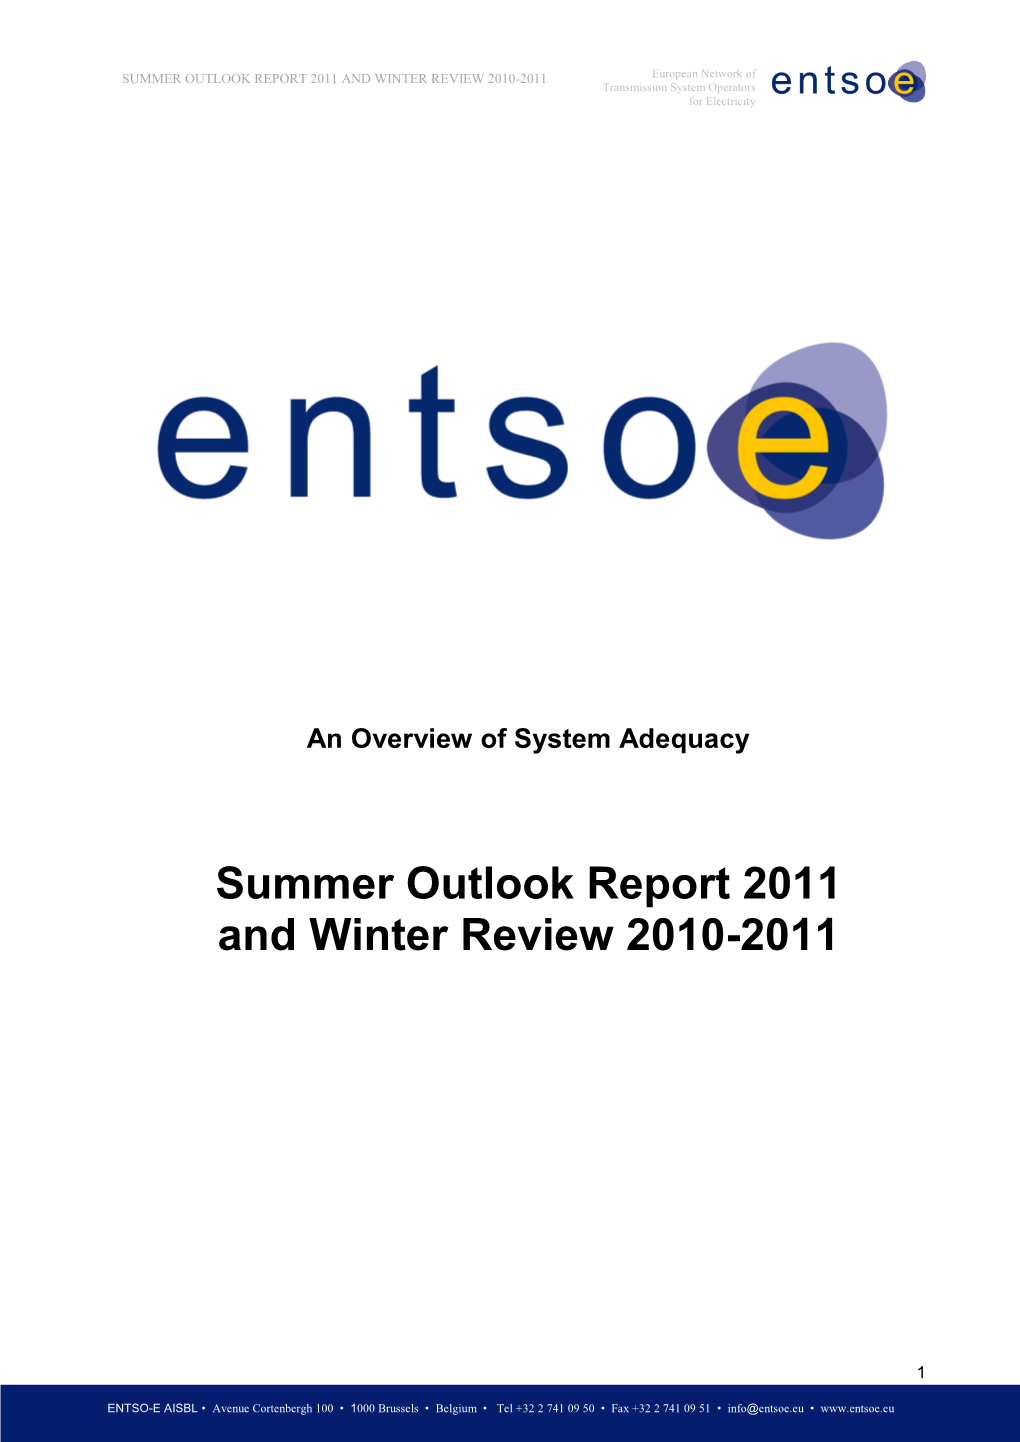 SUMMER OUTLOOK REPORT 2011 and WINTER REVIEW 2010-2011 European Network of Transmission System Operators for Electricity